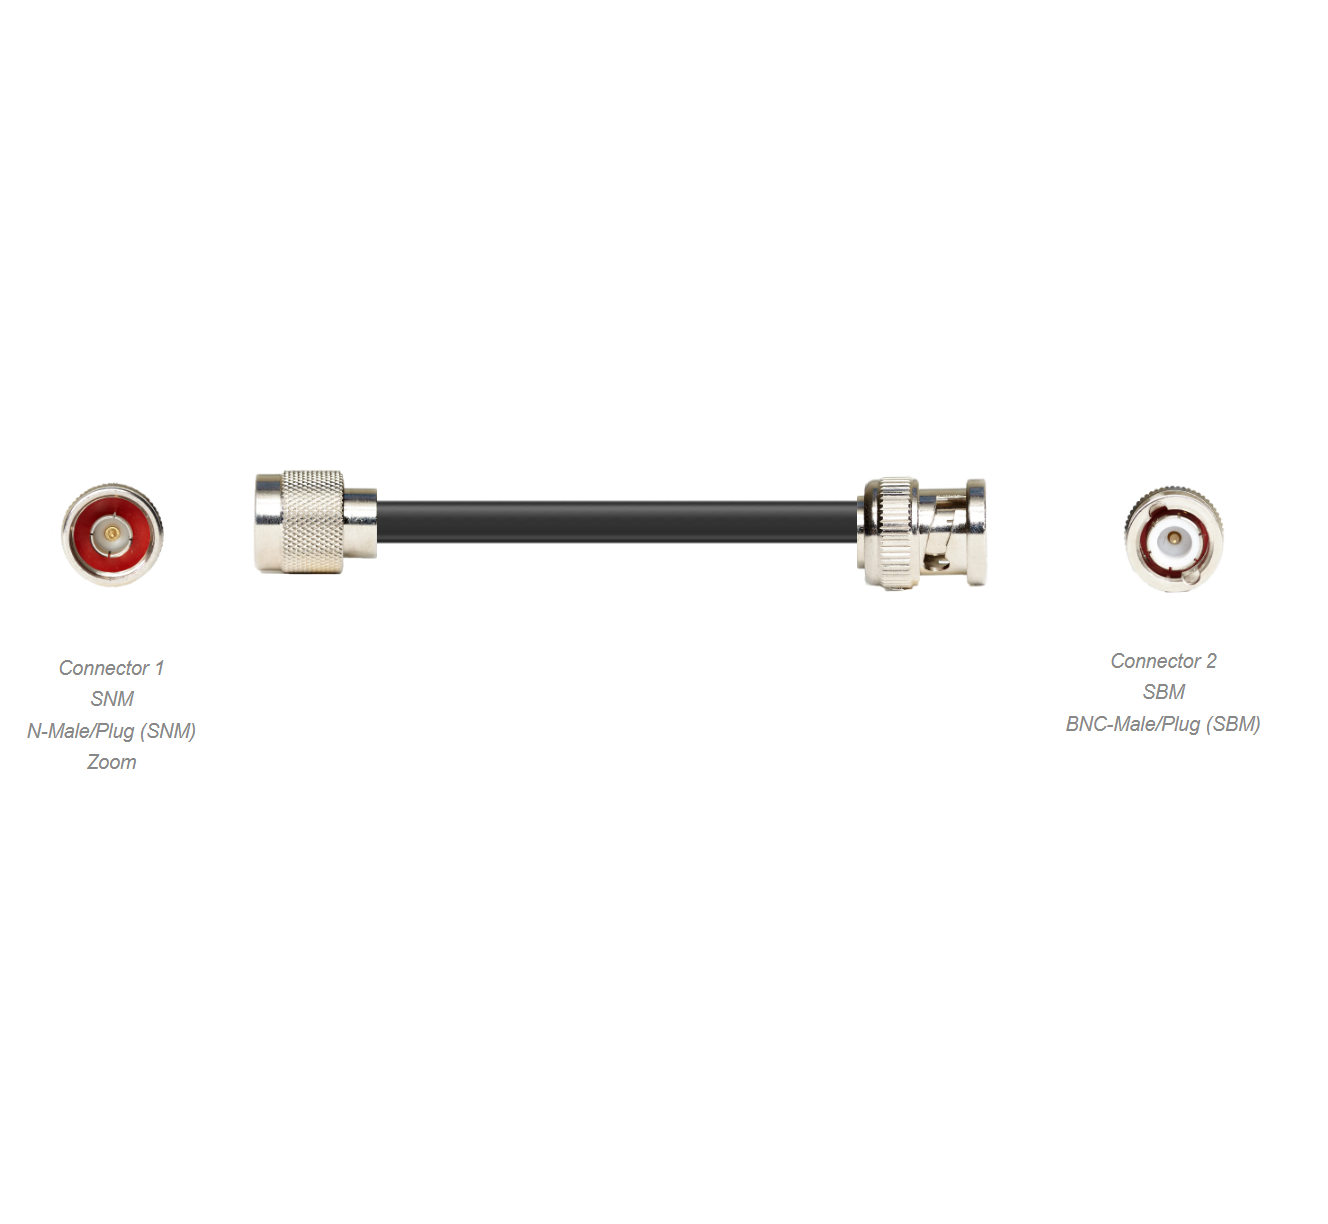 PT400-100-SBM-SNM: 100 Feet 400 Type Low loss Cable Assembly with BNC-Male and N-Male Connectors